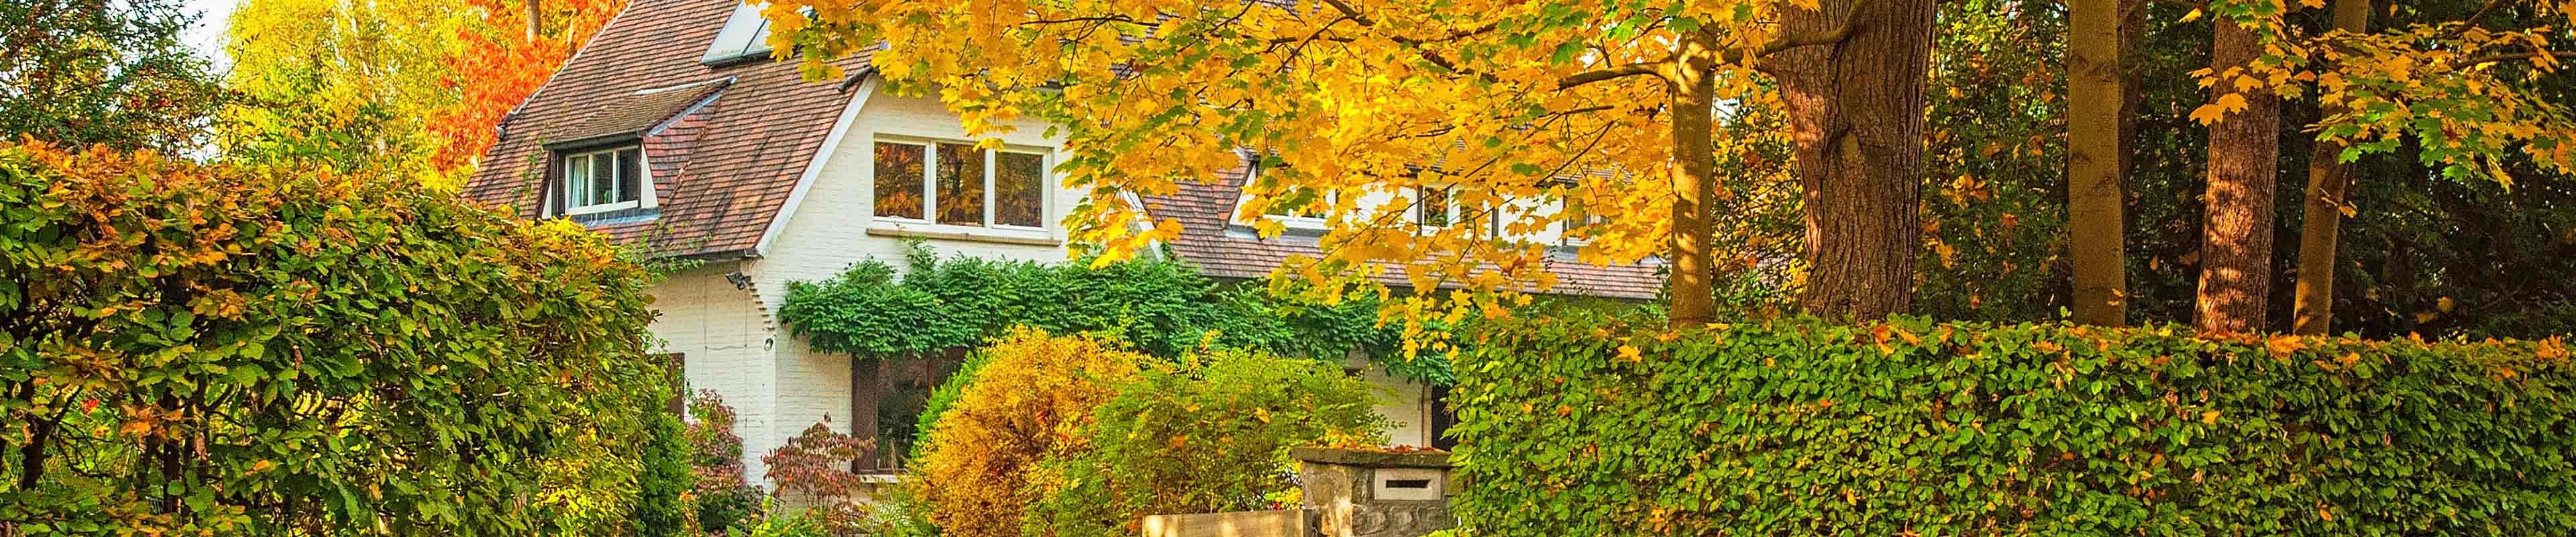 Image of a home amid the colors of fall leaves.